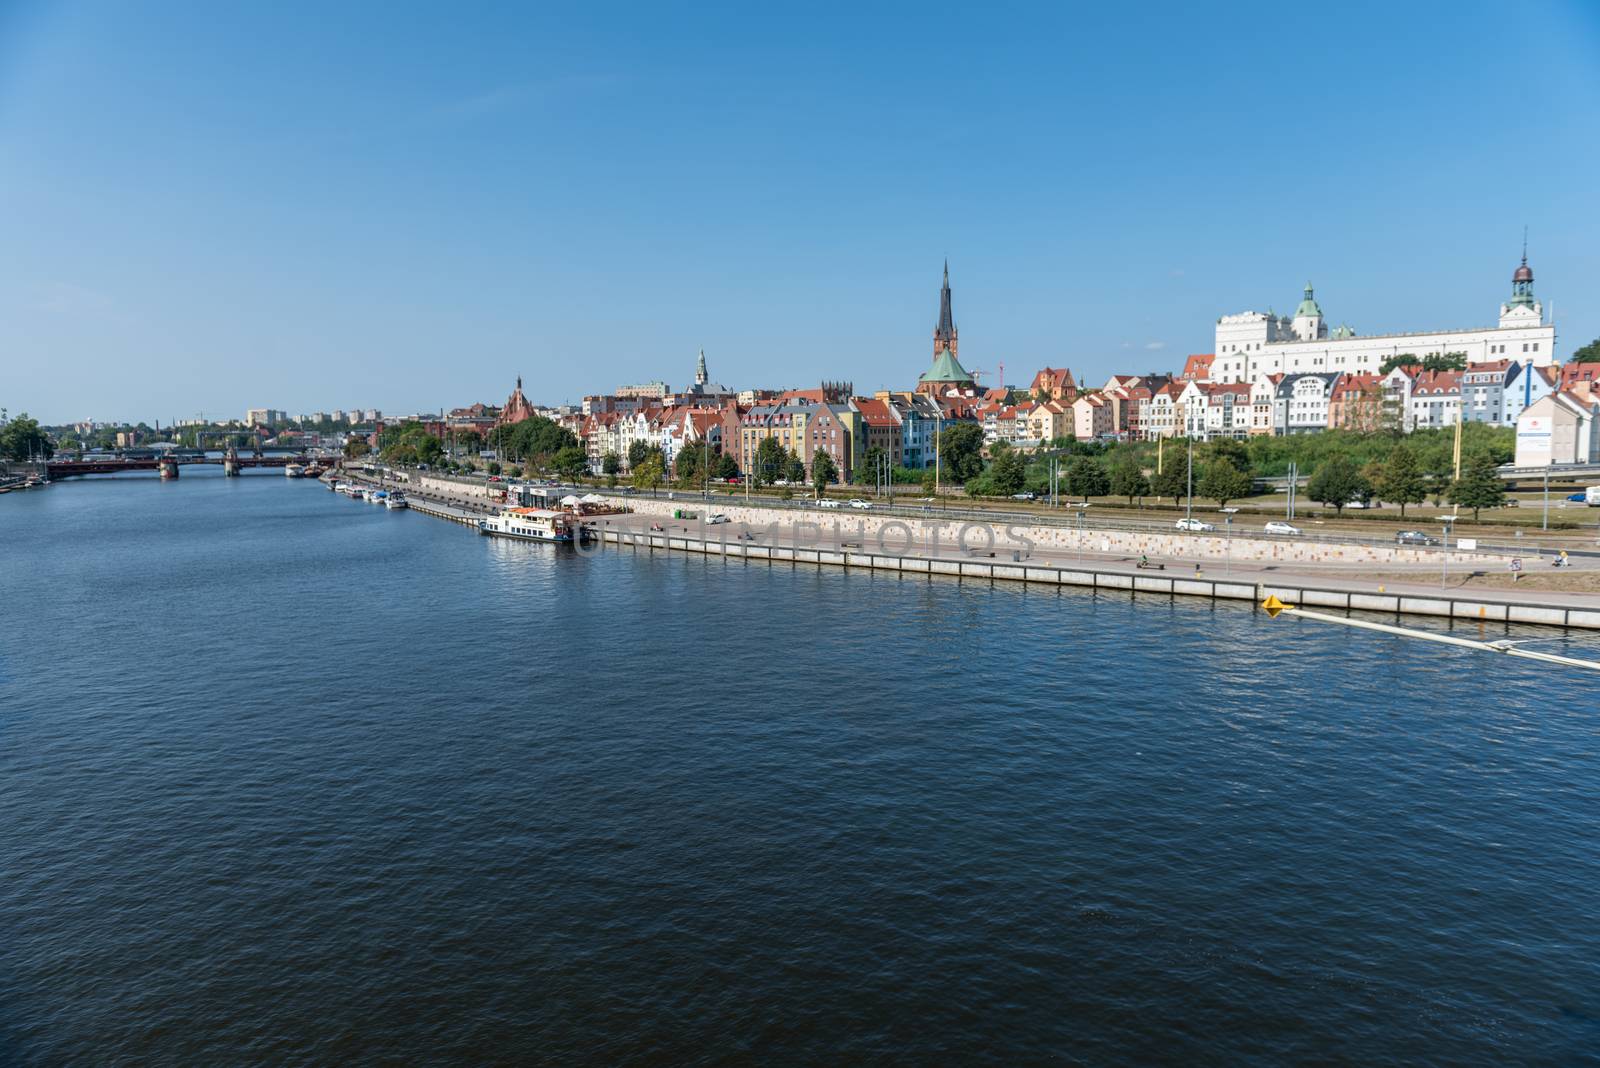 Left bank of the Oder river in Szczecin with the maritime museum and the terraces